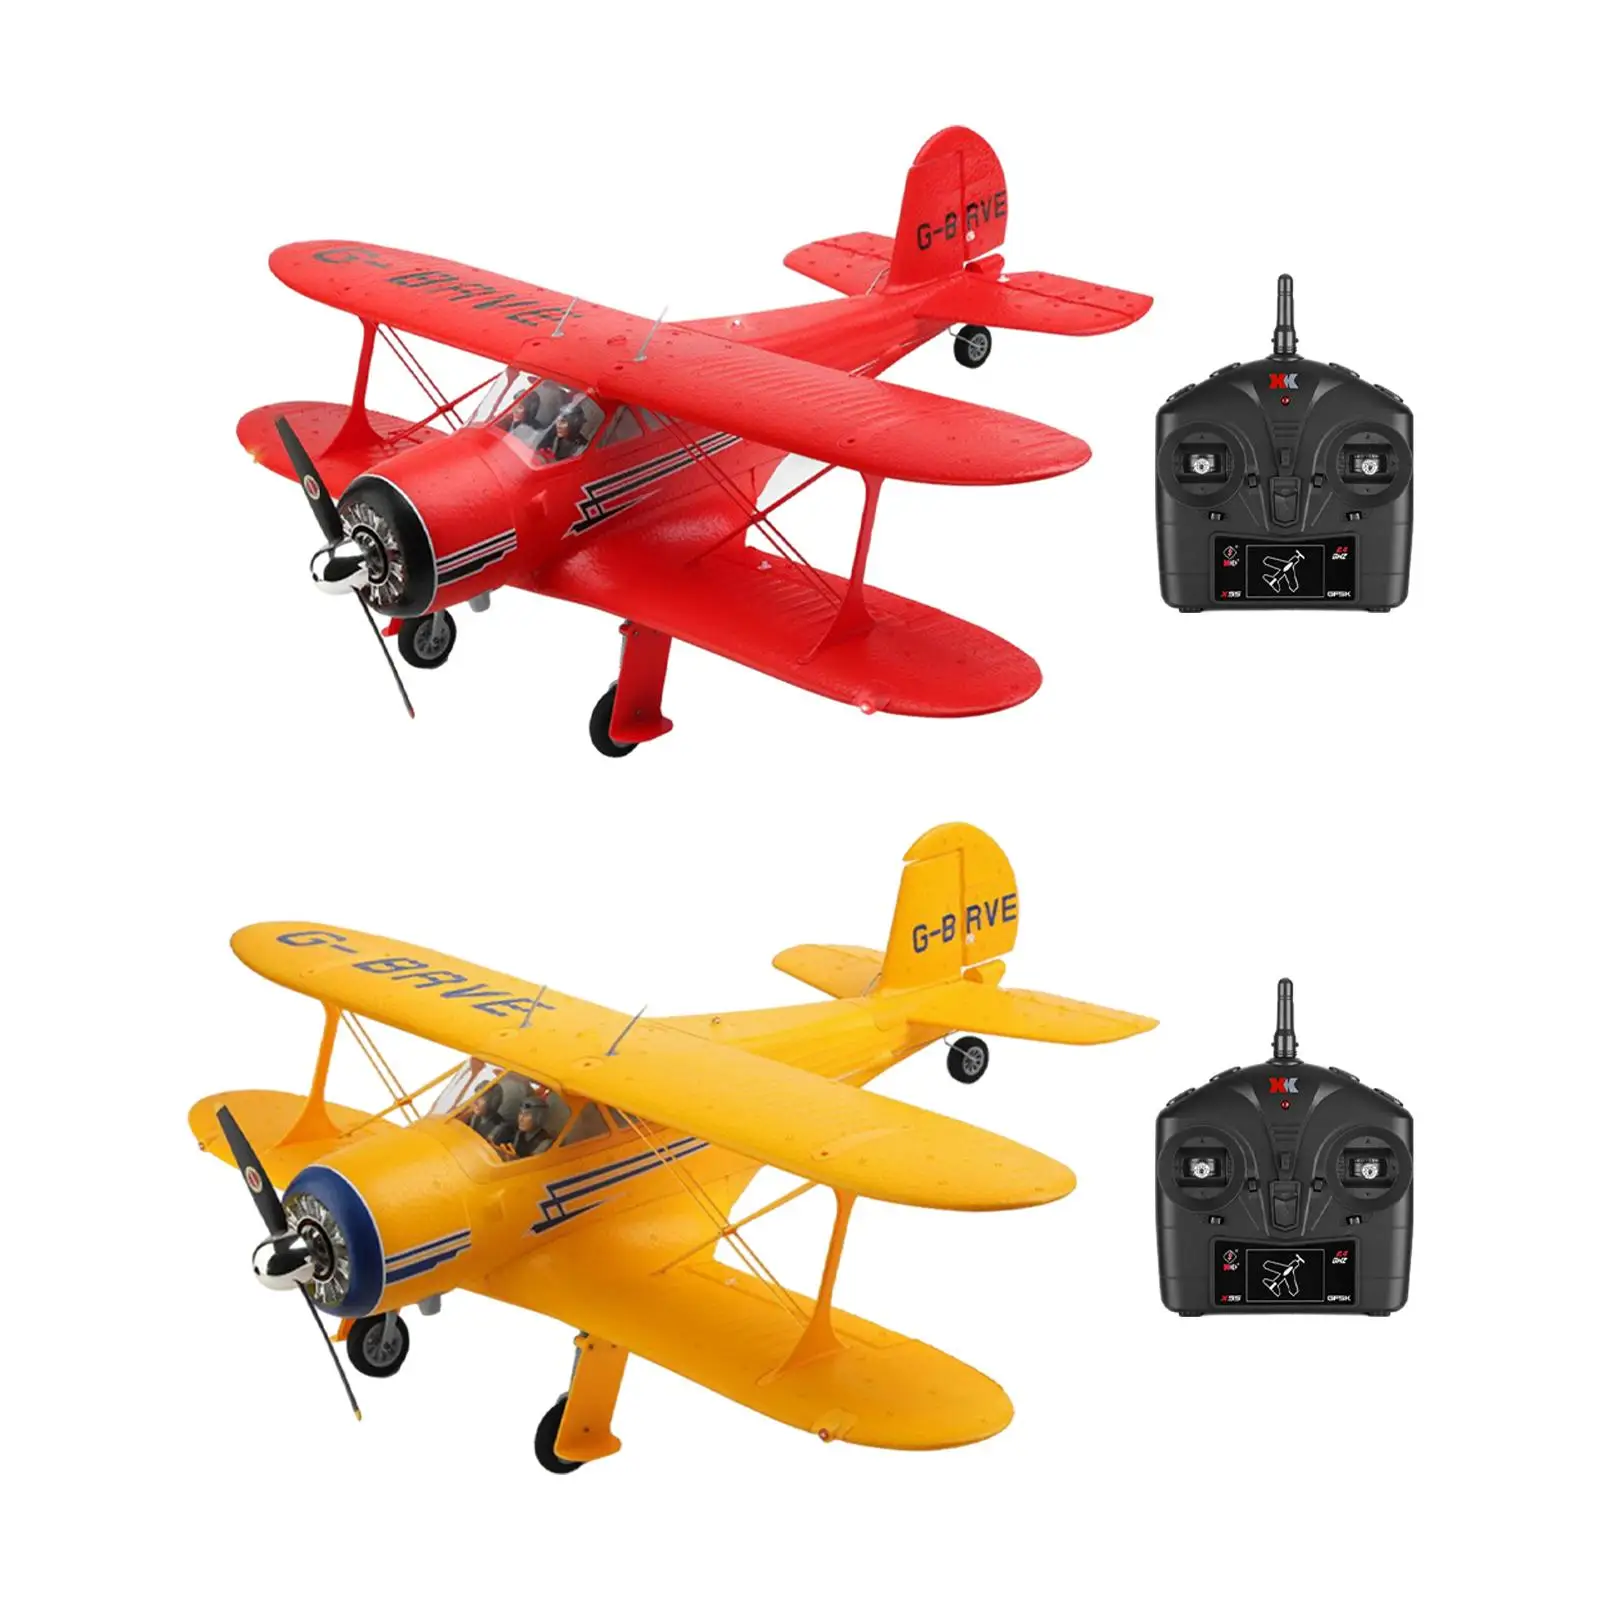 Wltoys A300 Beech D17S RC Plane Stunt Flying 4CH Aircraft Remote Control Airplane Glider for Beginner Kids Adults Birthday Gifts